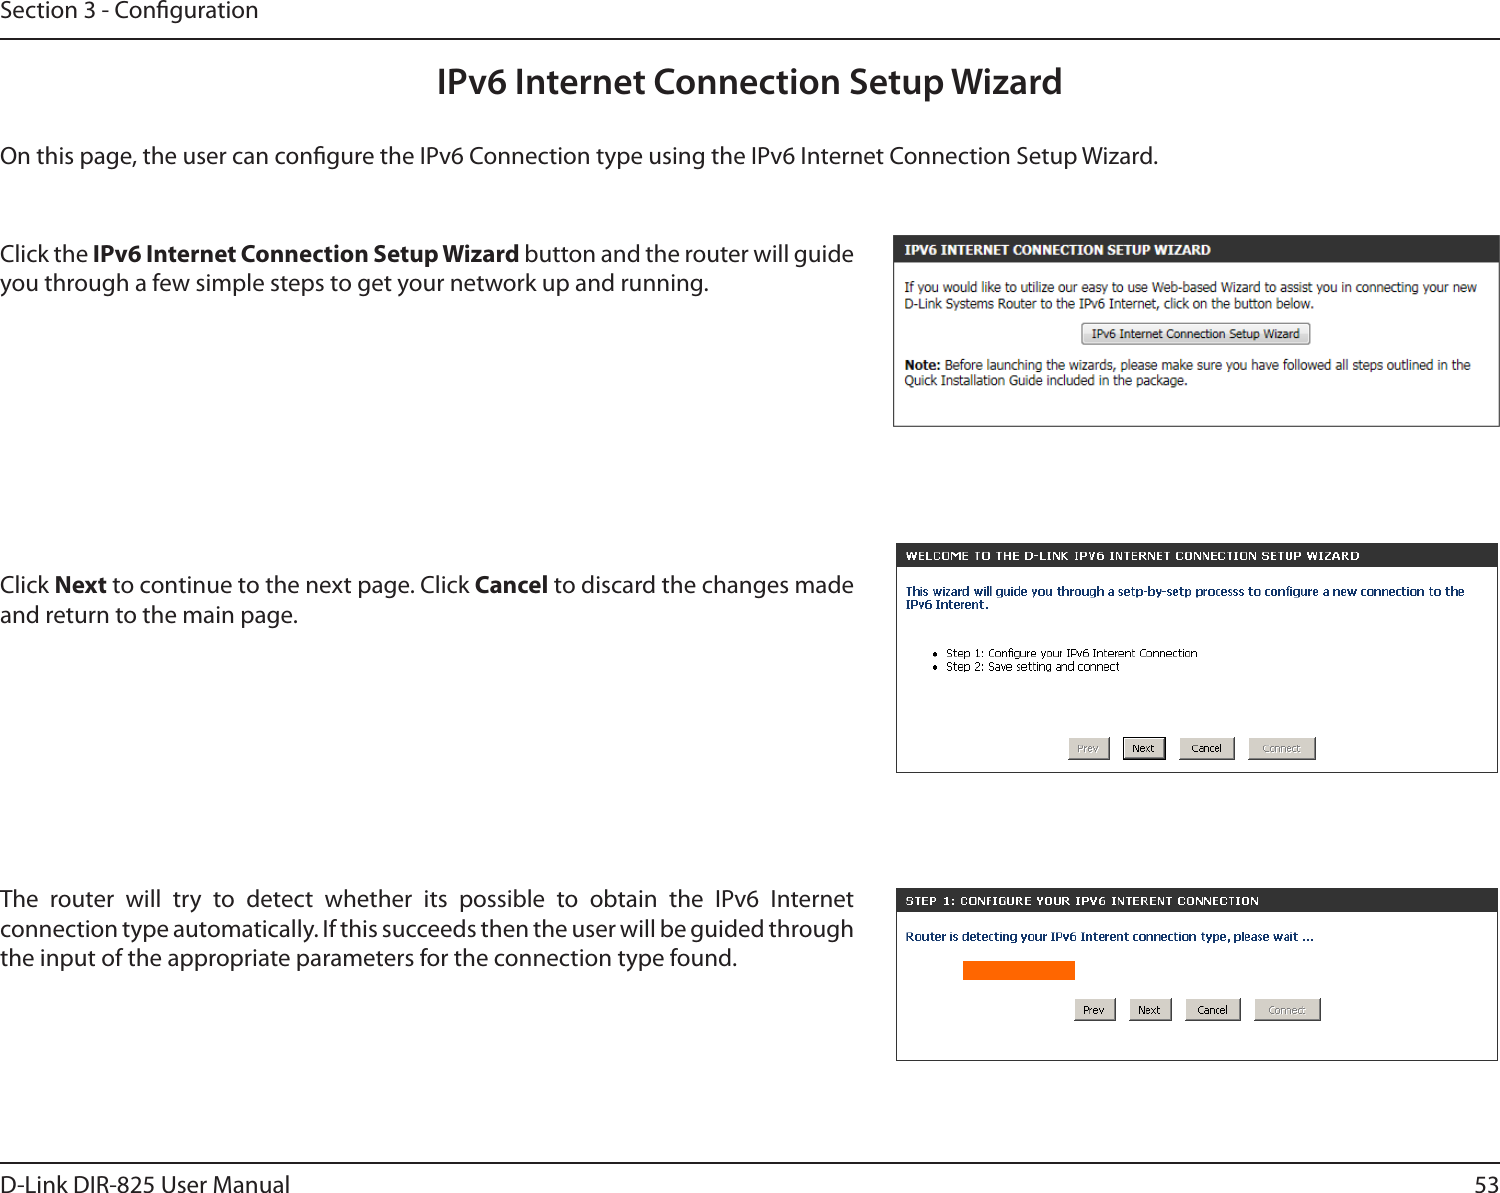 53D-Link DIR-825 User ManualSection 3 - CongurationIPv6 Internet Connection Setup WizardOn this page, the user can congure the IPv6 Connection type using the IPv6 Internet Connection Setup Wizard.Click the IPv6 Internet Connection Setup Wizard button and the router will guide you through a few simple steps to get your network up and running.Click Next to continue to the next page. Click Cancel to discard the changes made and return to the main page.The  router  will  try  to  detect  whether  its  possible  to  obtain  the  IPv6  Internet connection type automatically. If this succeeds then the user will be guided through the input of the appropriate parameters for the connection type found.